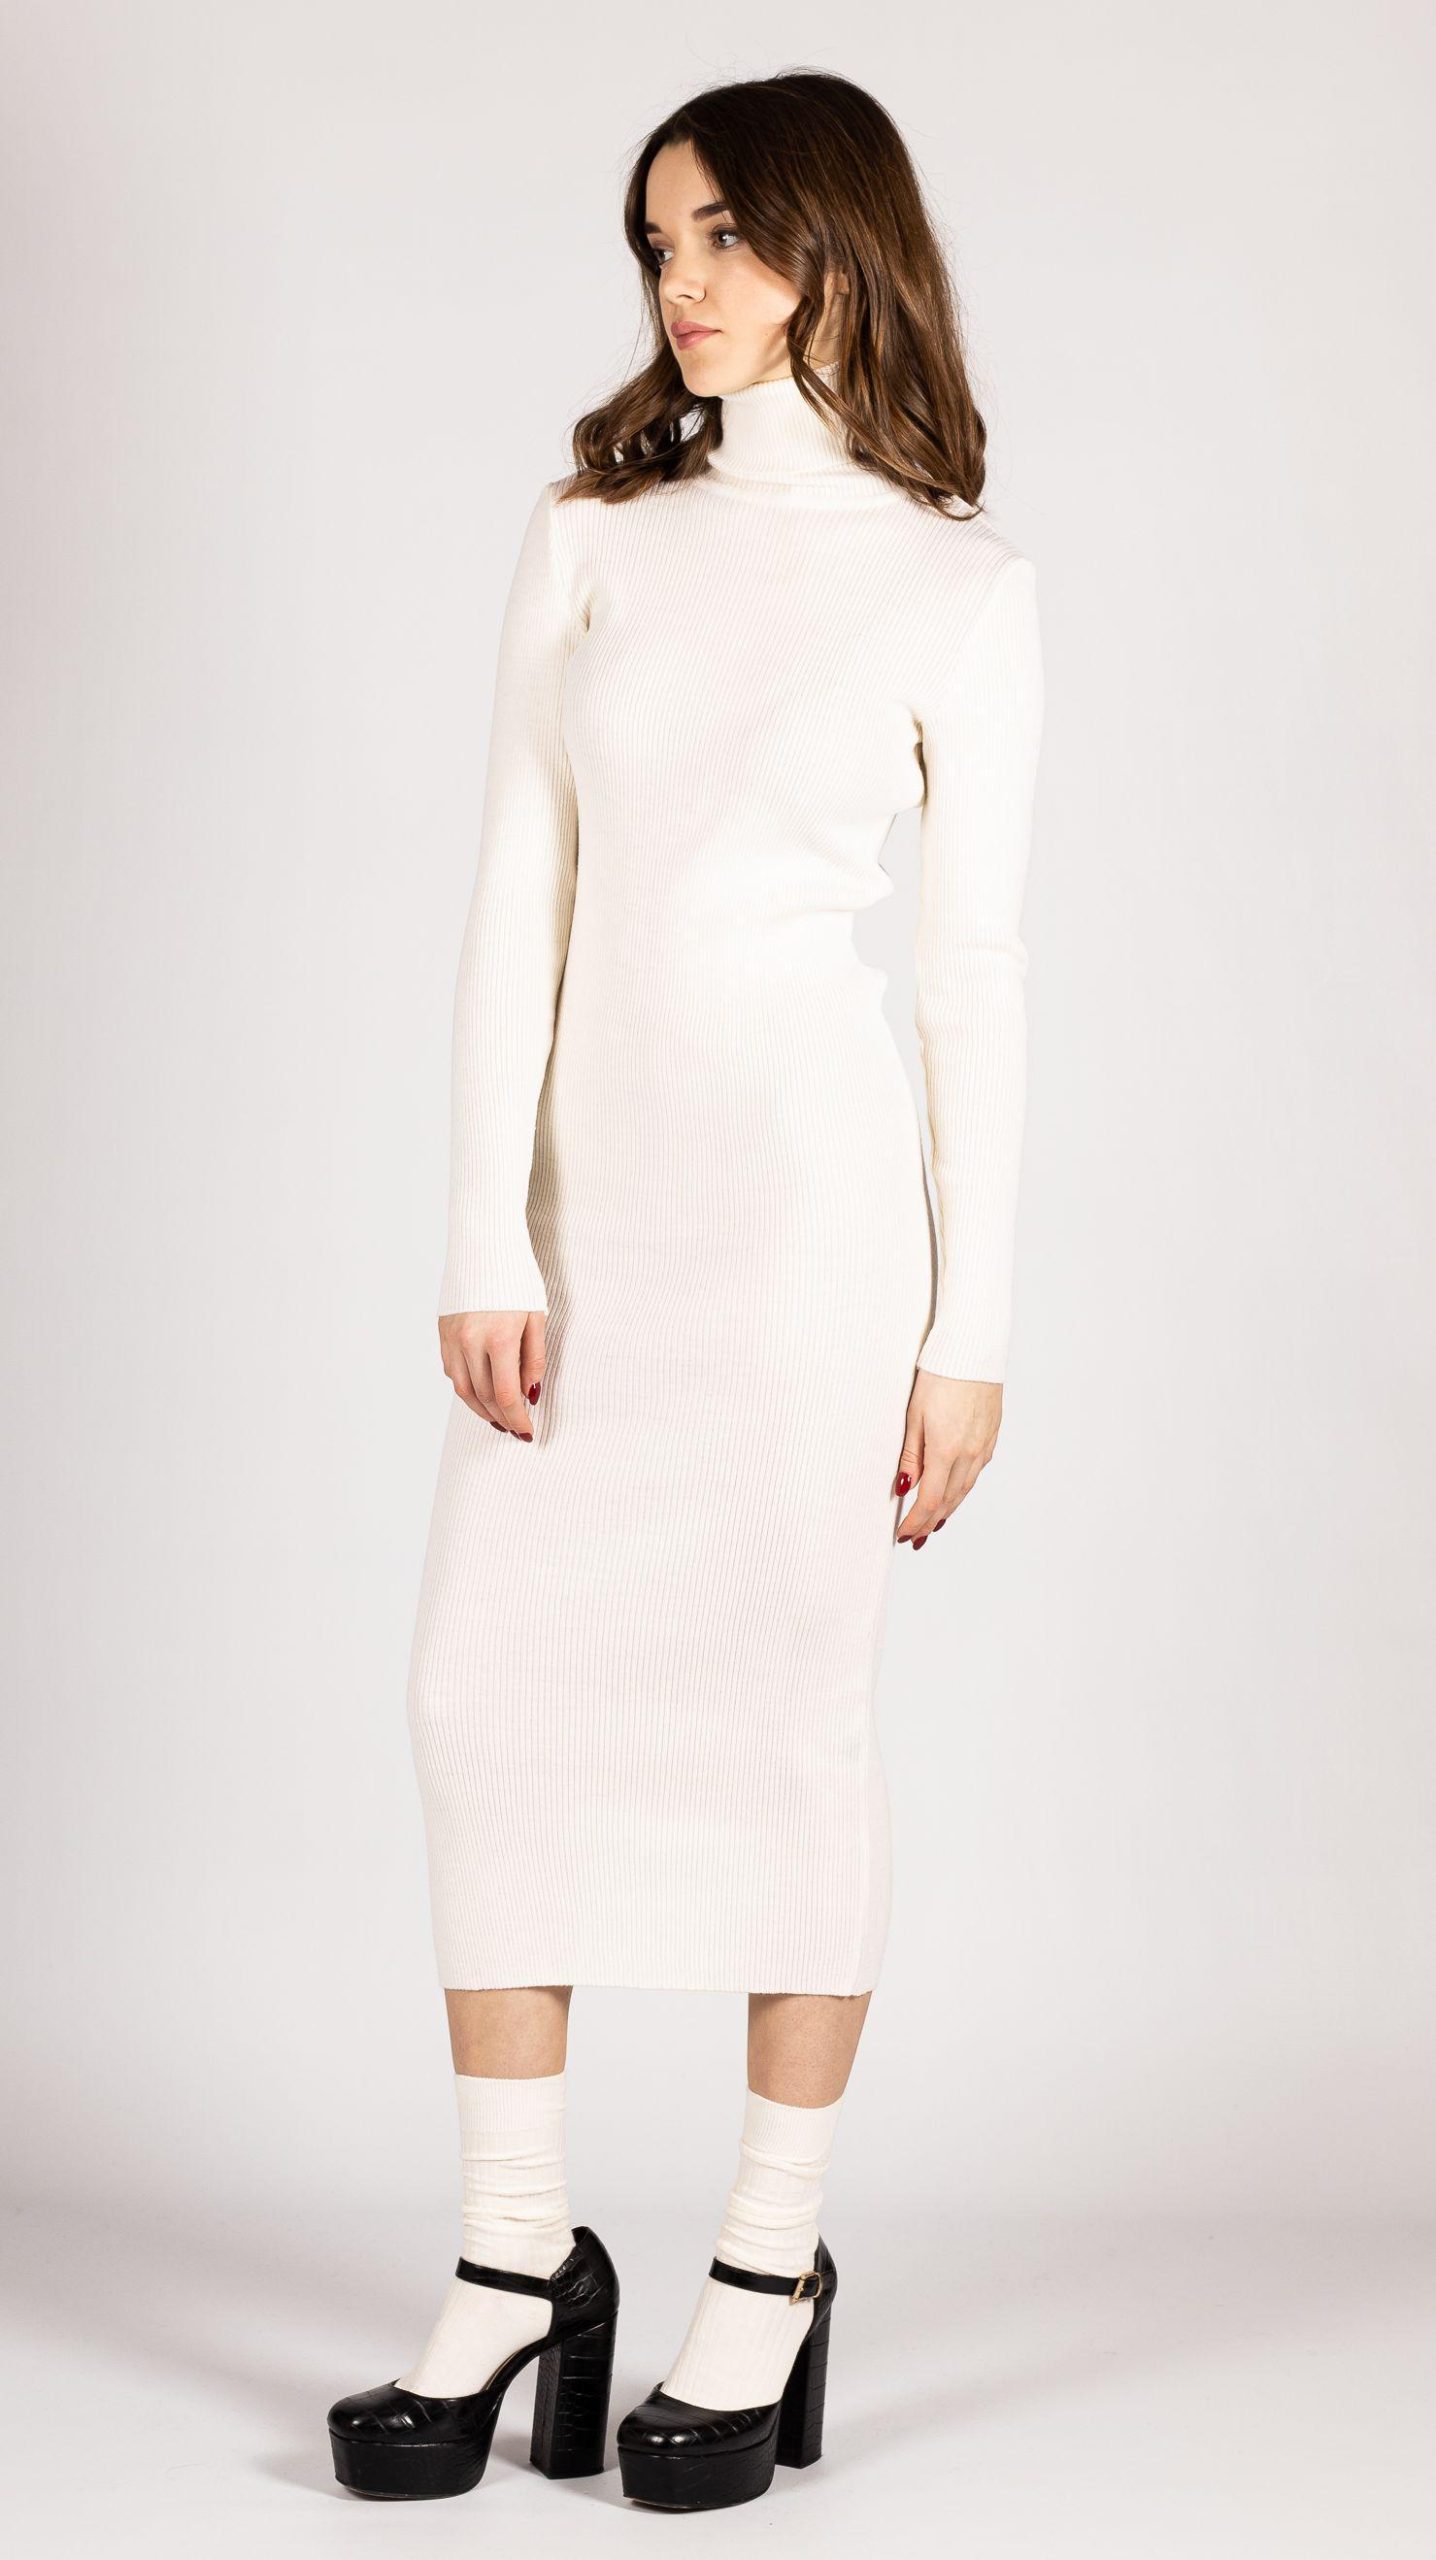 Knit fitted turtleneck dress in off-white merino wool ALICE